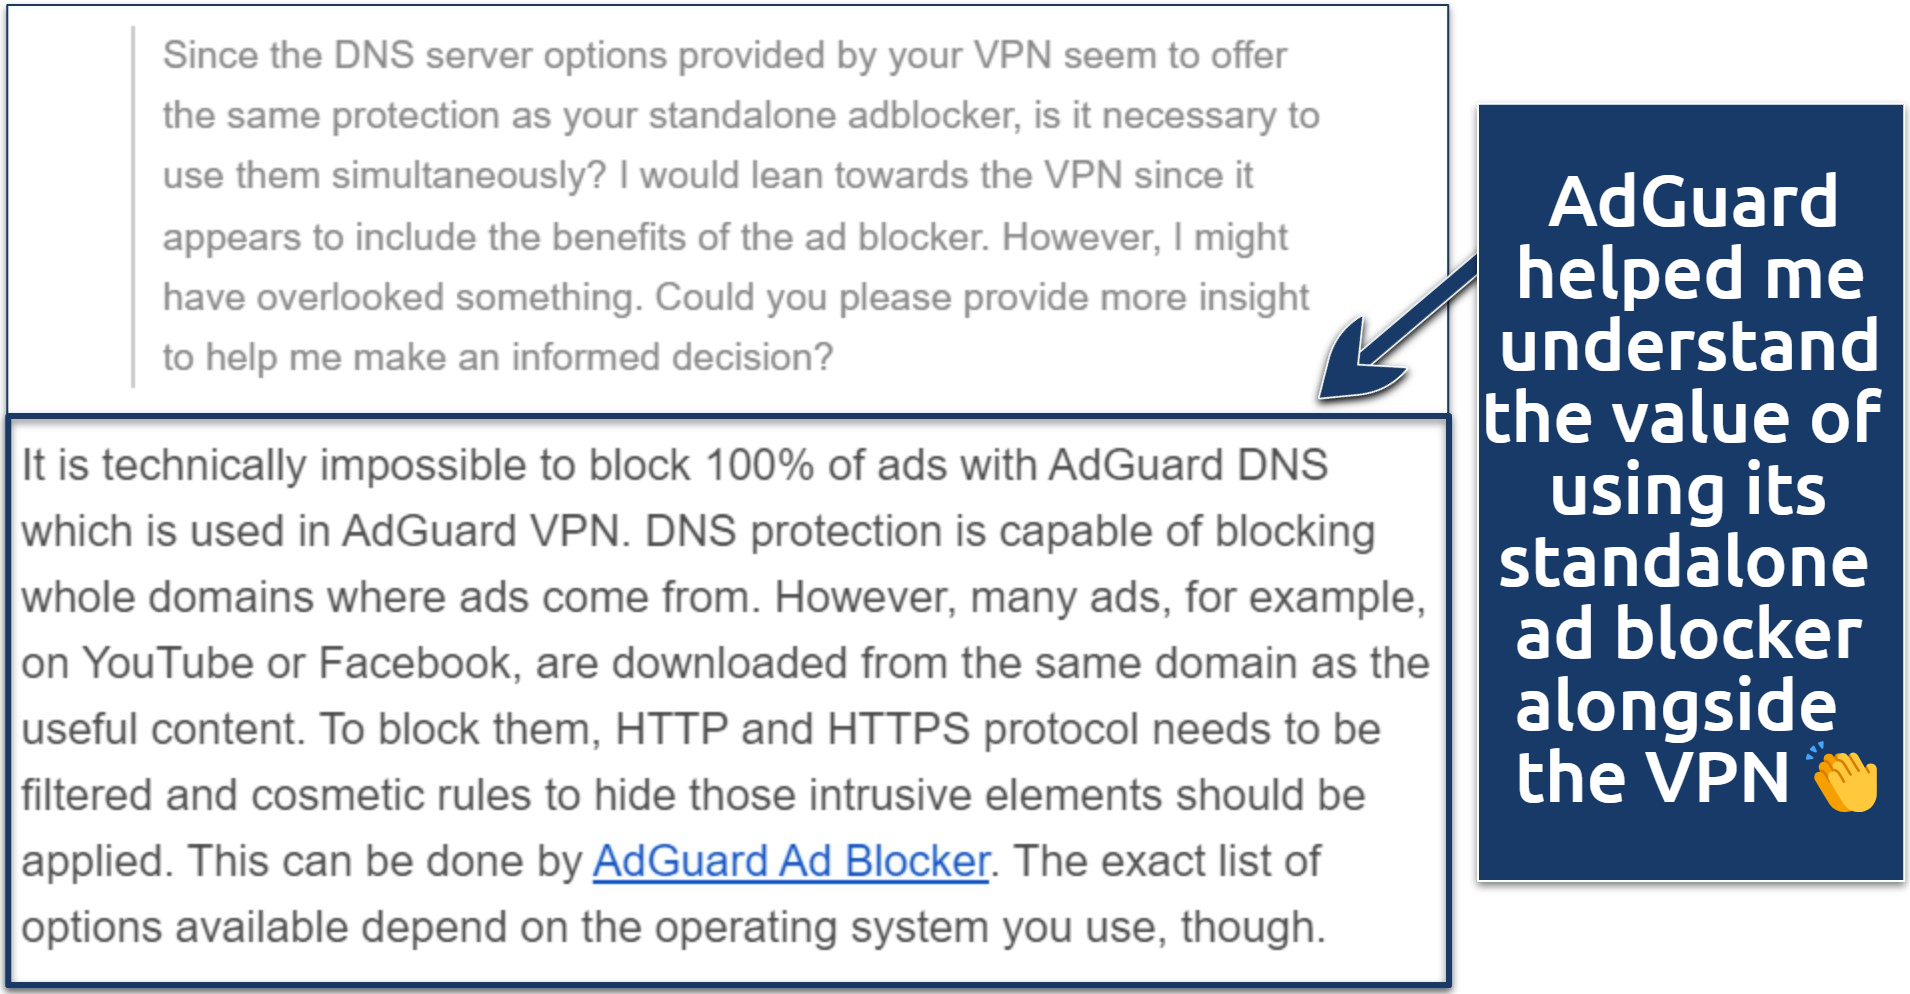 A screenshot showing AdGuard's support team helping me understand the value of using its standalone ad blocker alongside the VPN